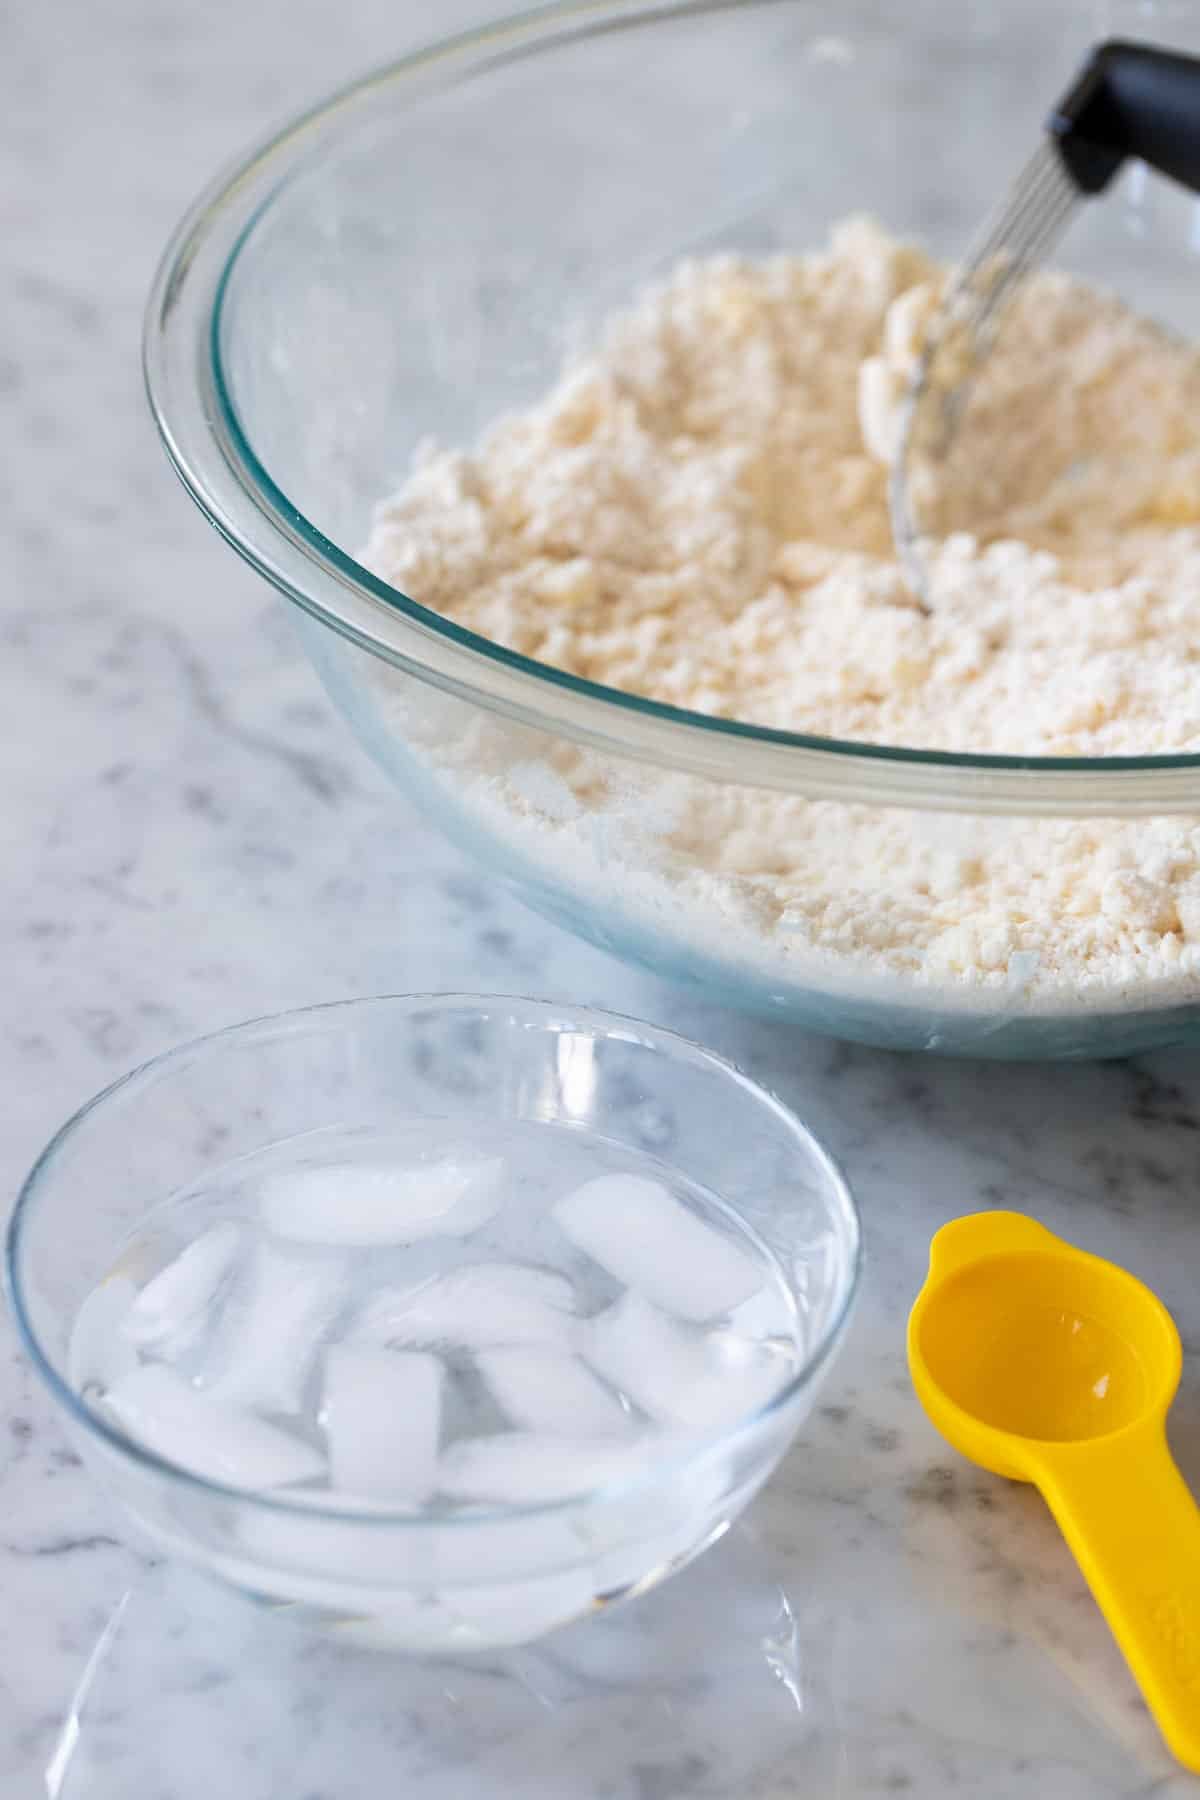 A bowl of ice water next to bigger bowl filled with flour and butter.